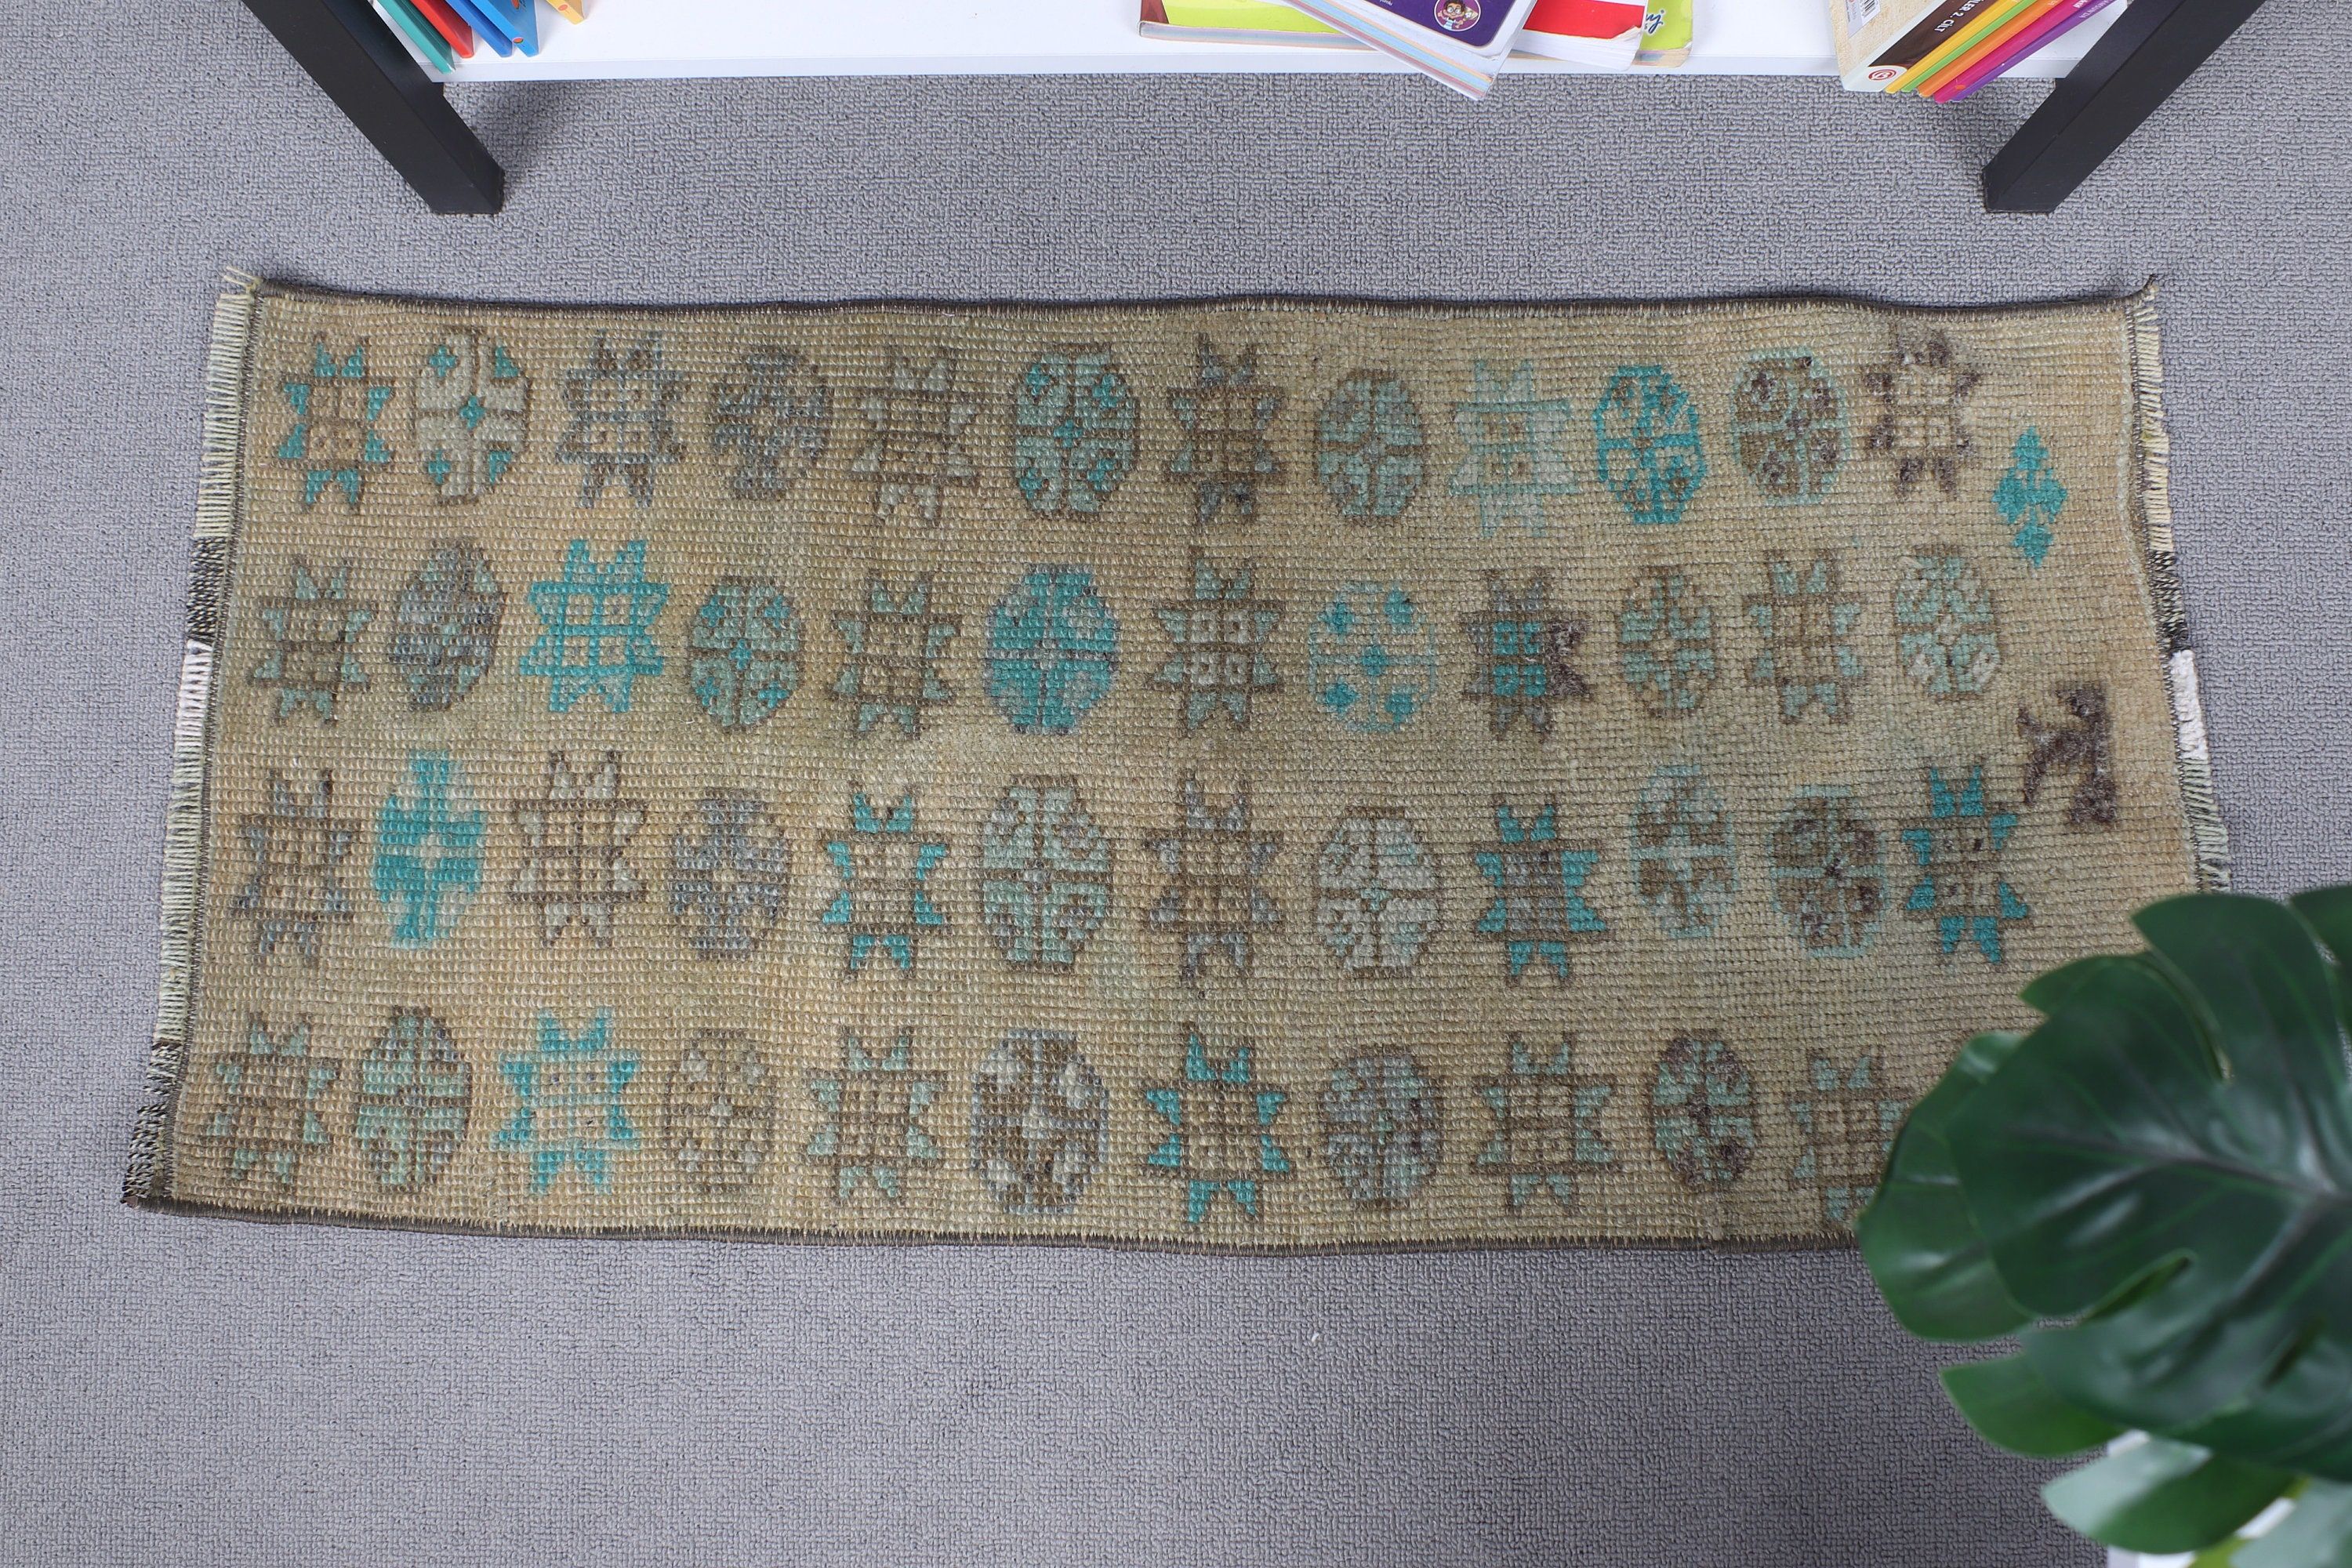 Turkish Rugs, Moroccan Rugs, Vintage Rugs, Kitchen Rug, Antique Rugs, Pastel Rugs, Green Floor Rug, Wall Hanging Rugs, 1.3x2.8 ft Small Rug